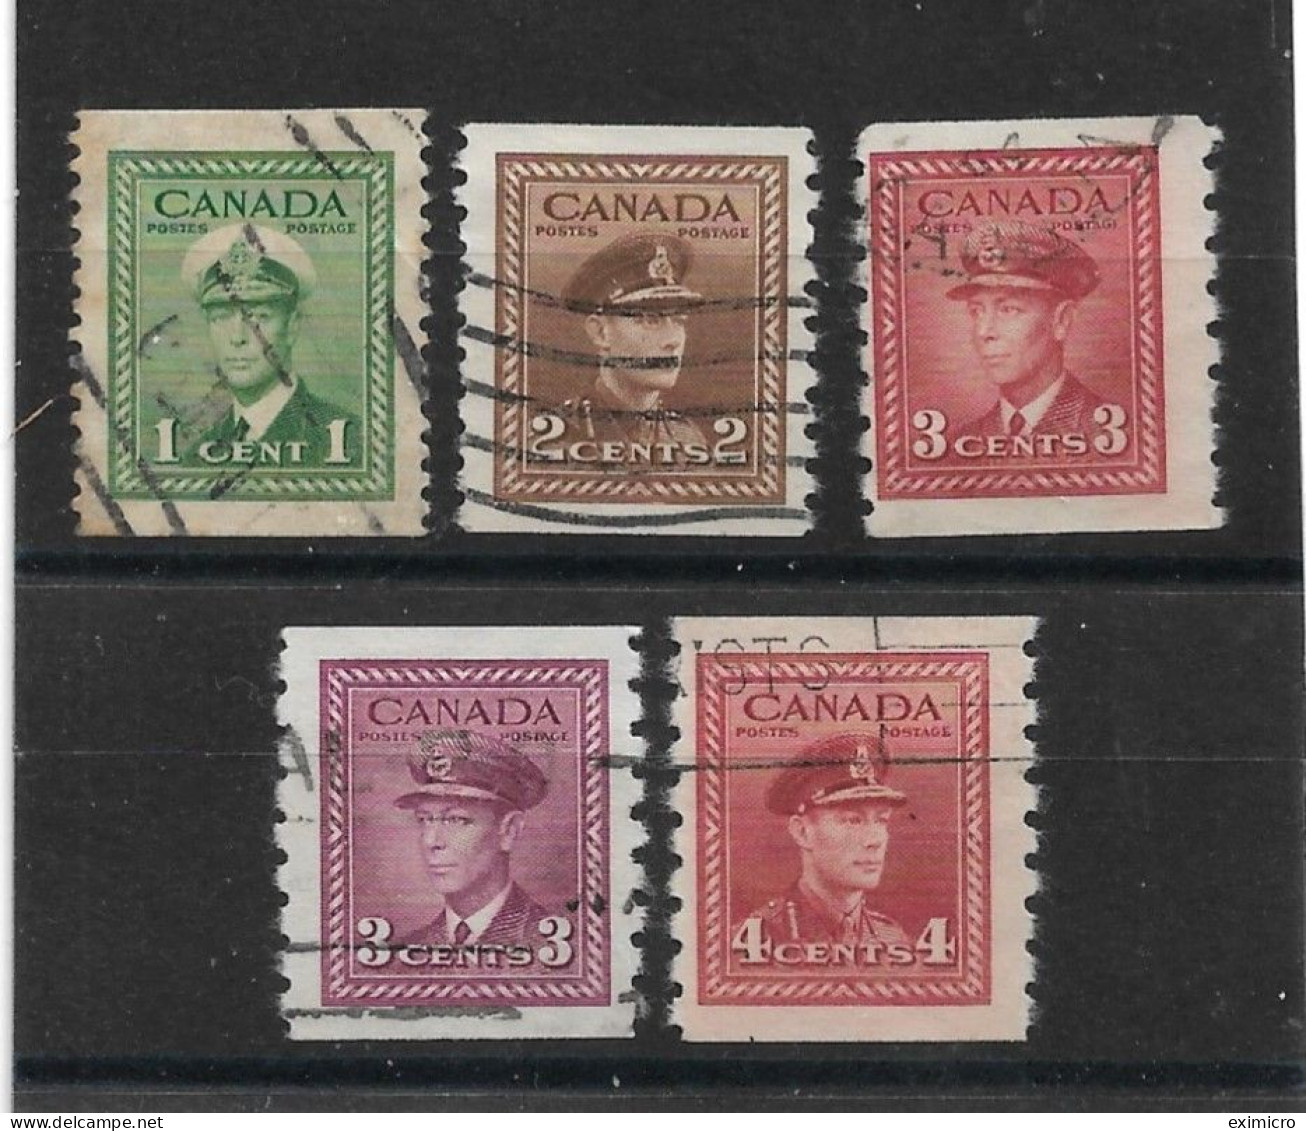 CANADA 1942 - 1943 COIL STAMPS SET IMPERF X PERF 8 SG 389/393 FINE USED Cat £26 - Gebraucht